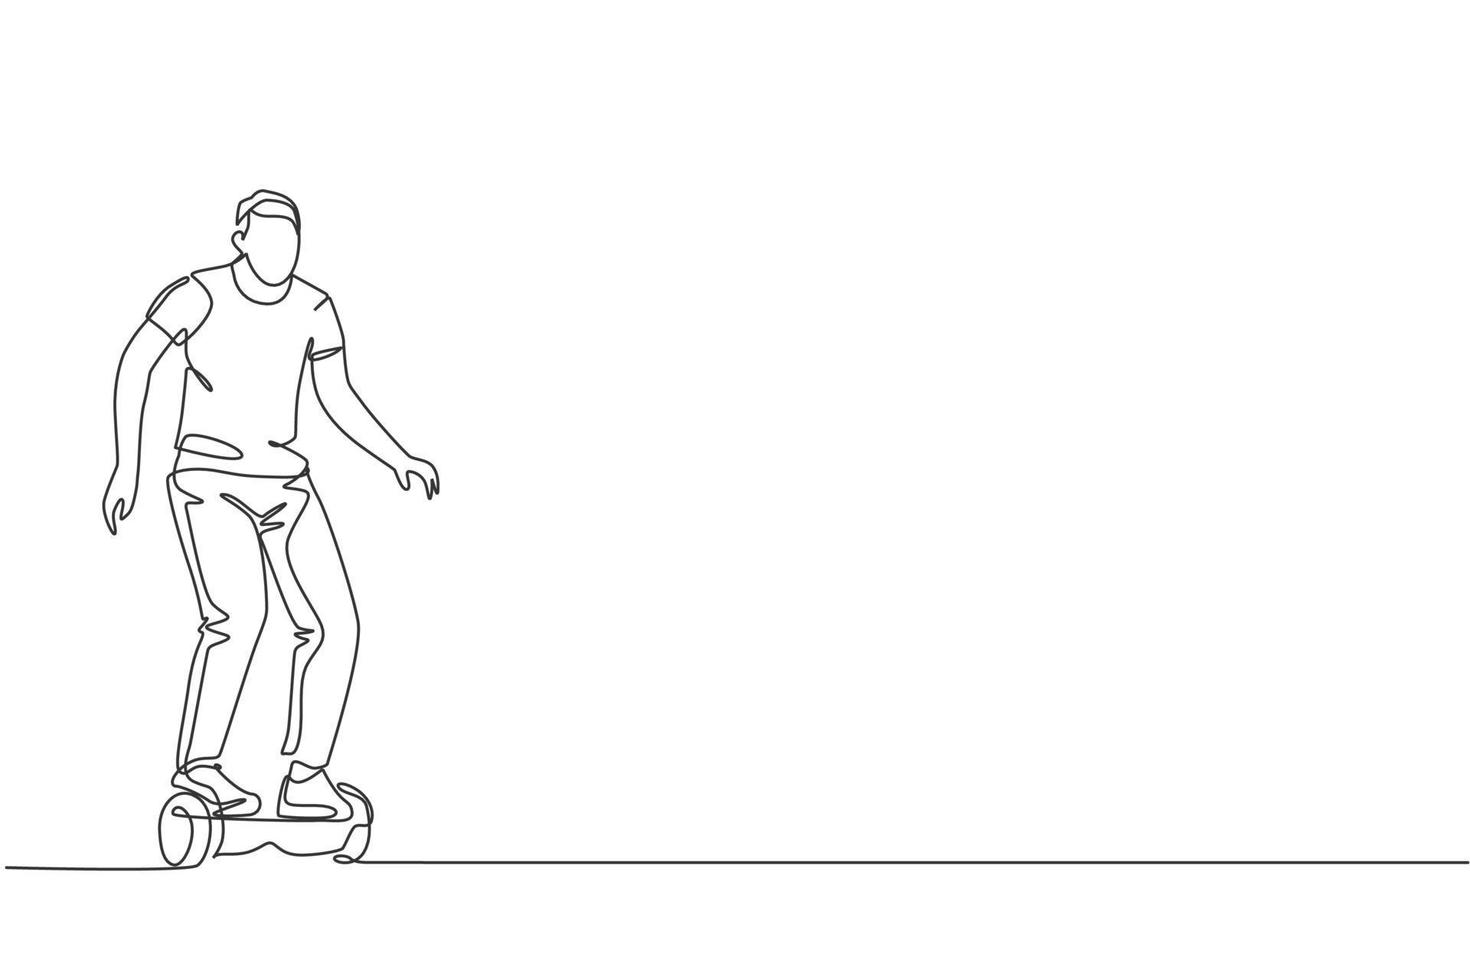 One single line drawing of young energetic man riding hoverboard at city park vector illustration. Future gyroscooter transport. Healthy lifestyle sport concept. Modern continuous line draw design